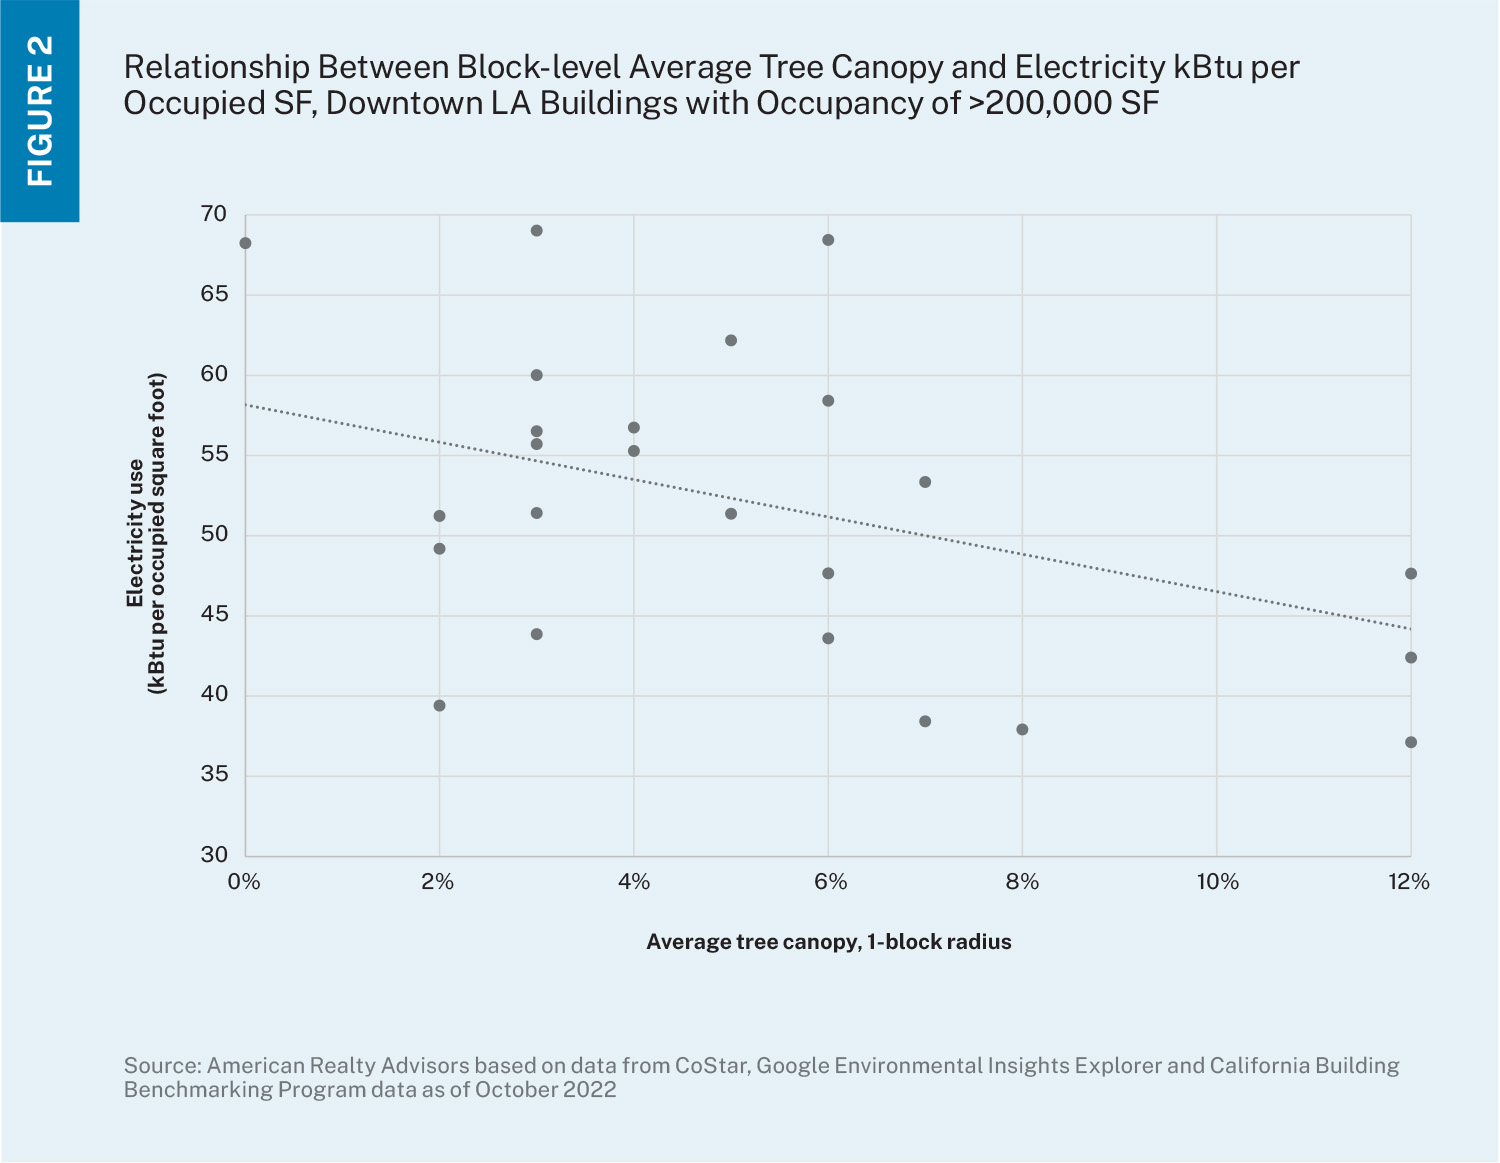 Dot plot chart depicting percentage of tree canopy, 1-block radius and electricity use per occupied square foot with trendline. 